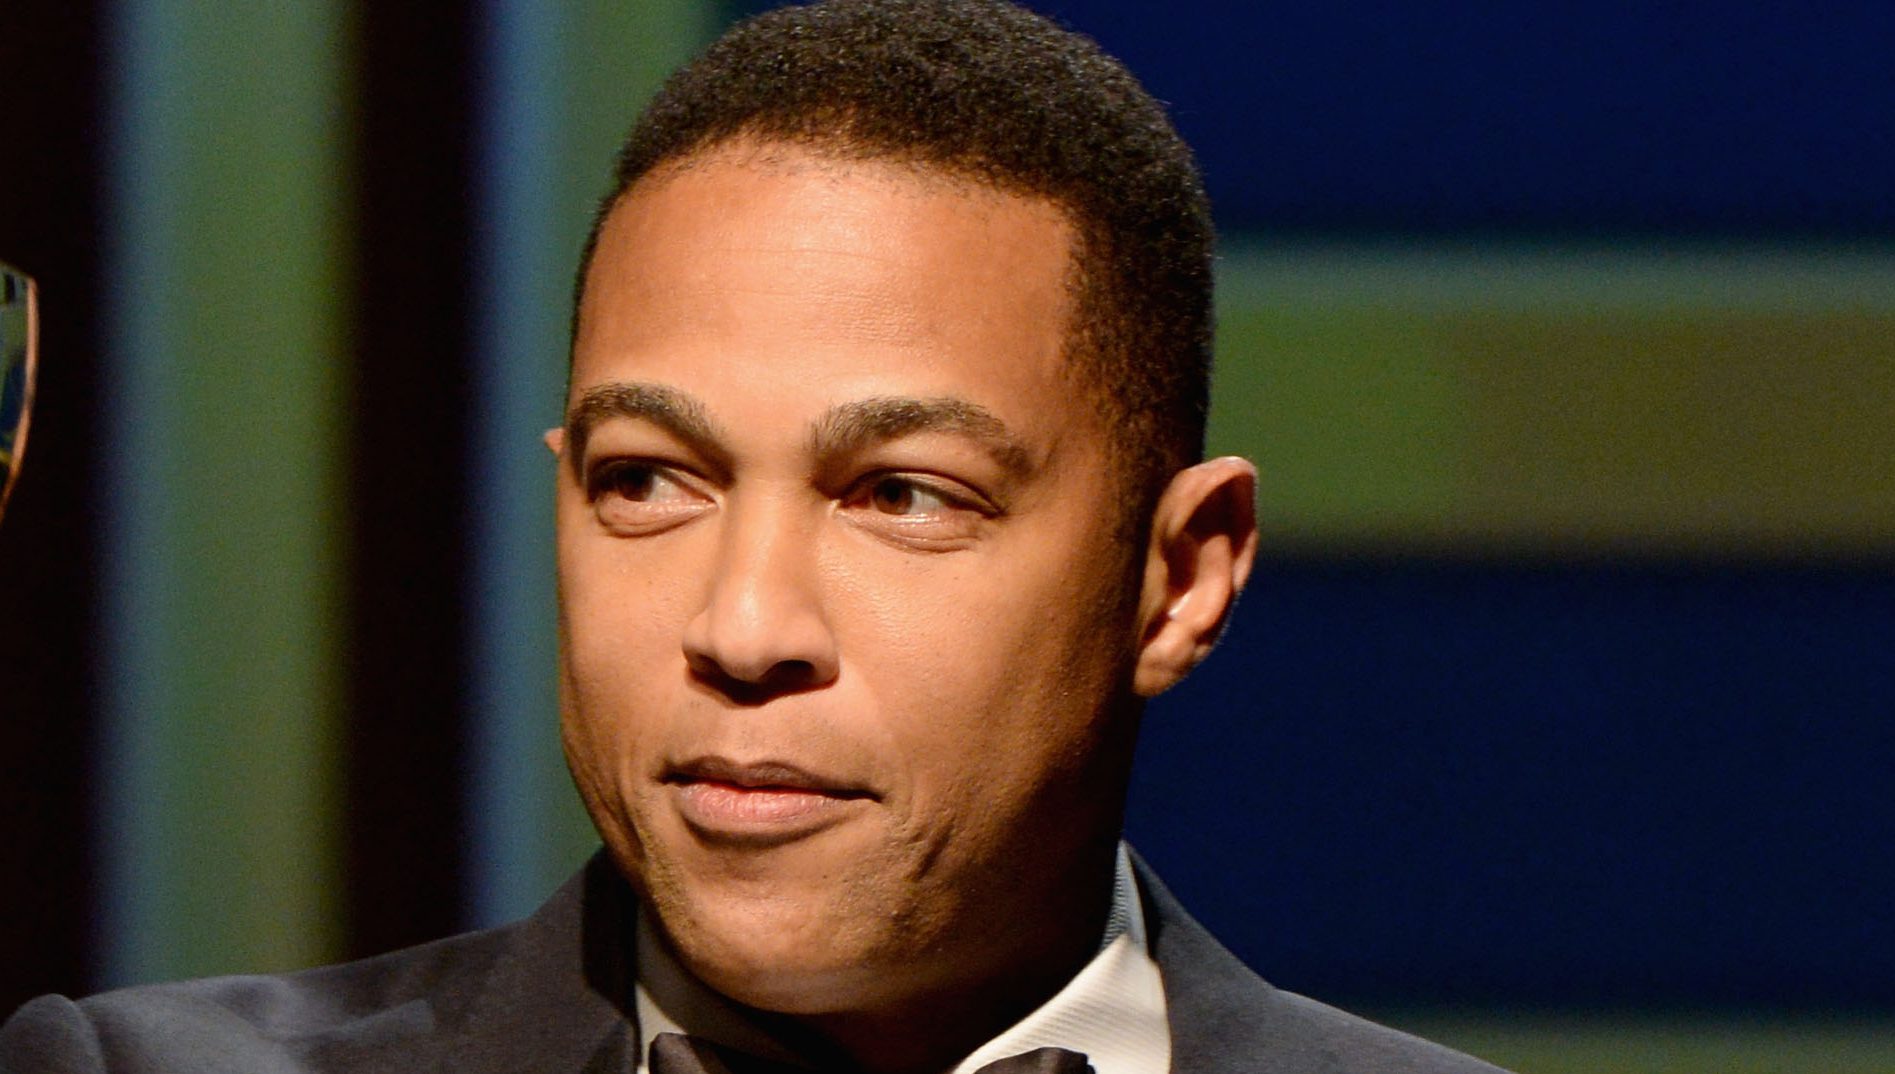 WATCH: Don Lemon Acts Drunk, Gets Ear Pierced New Years Eve 2017